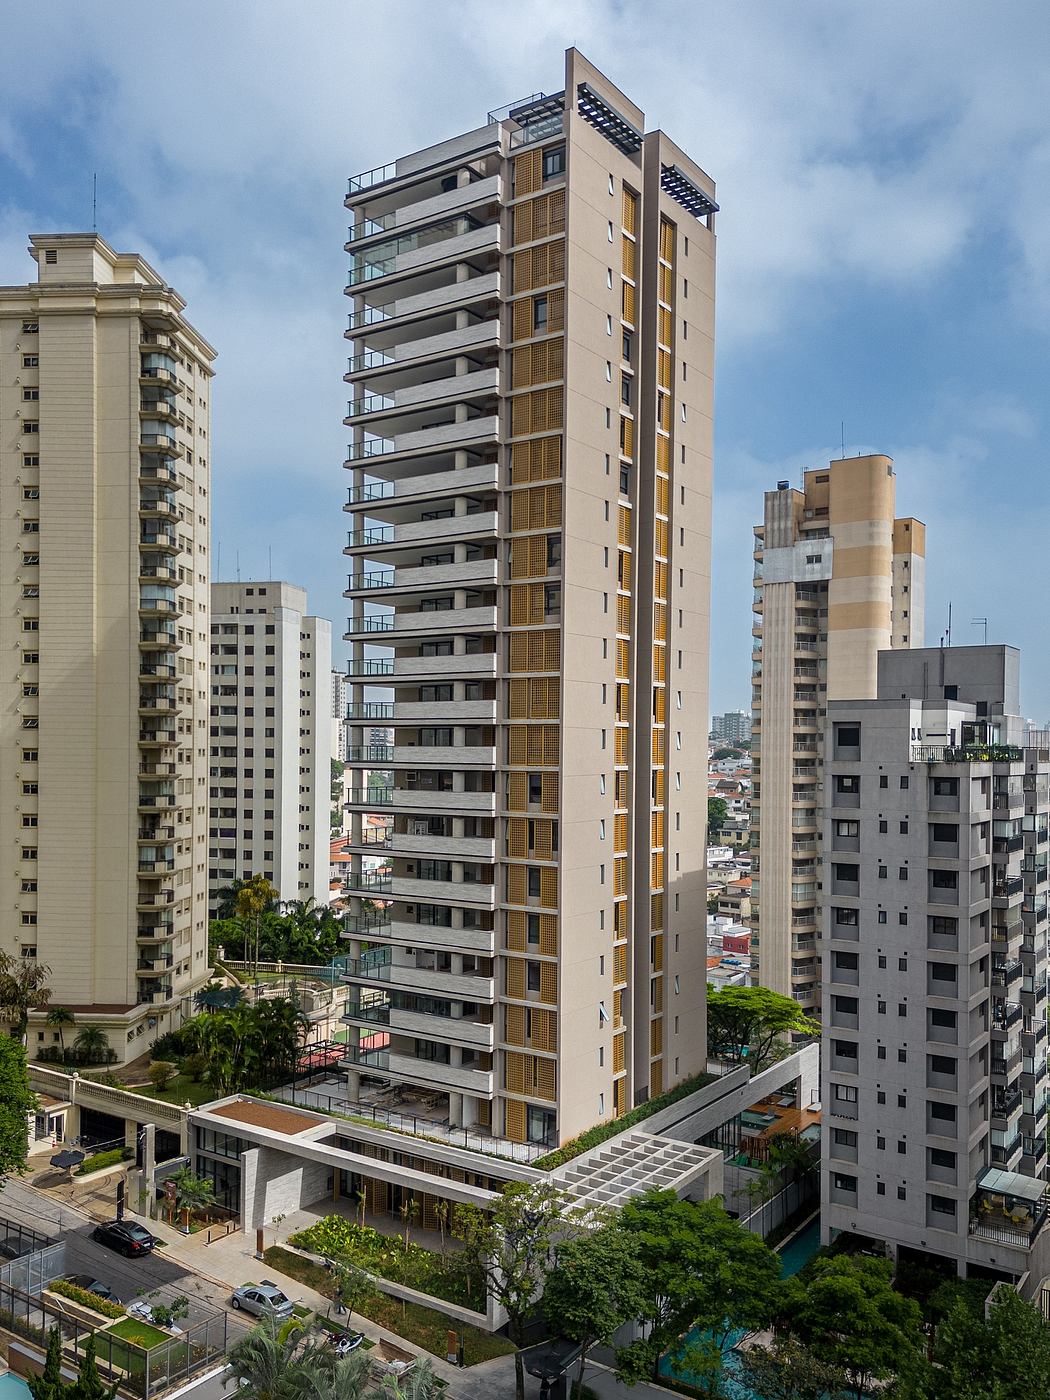 Contemporary high-rise residential building with balconies amidst cityscape.